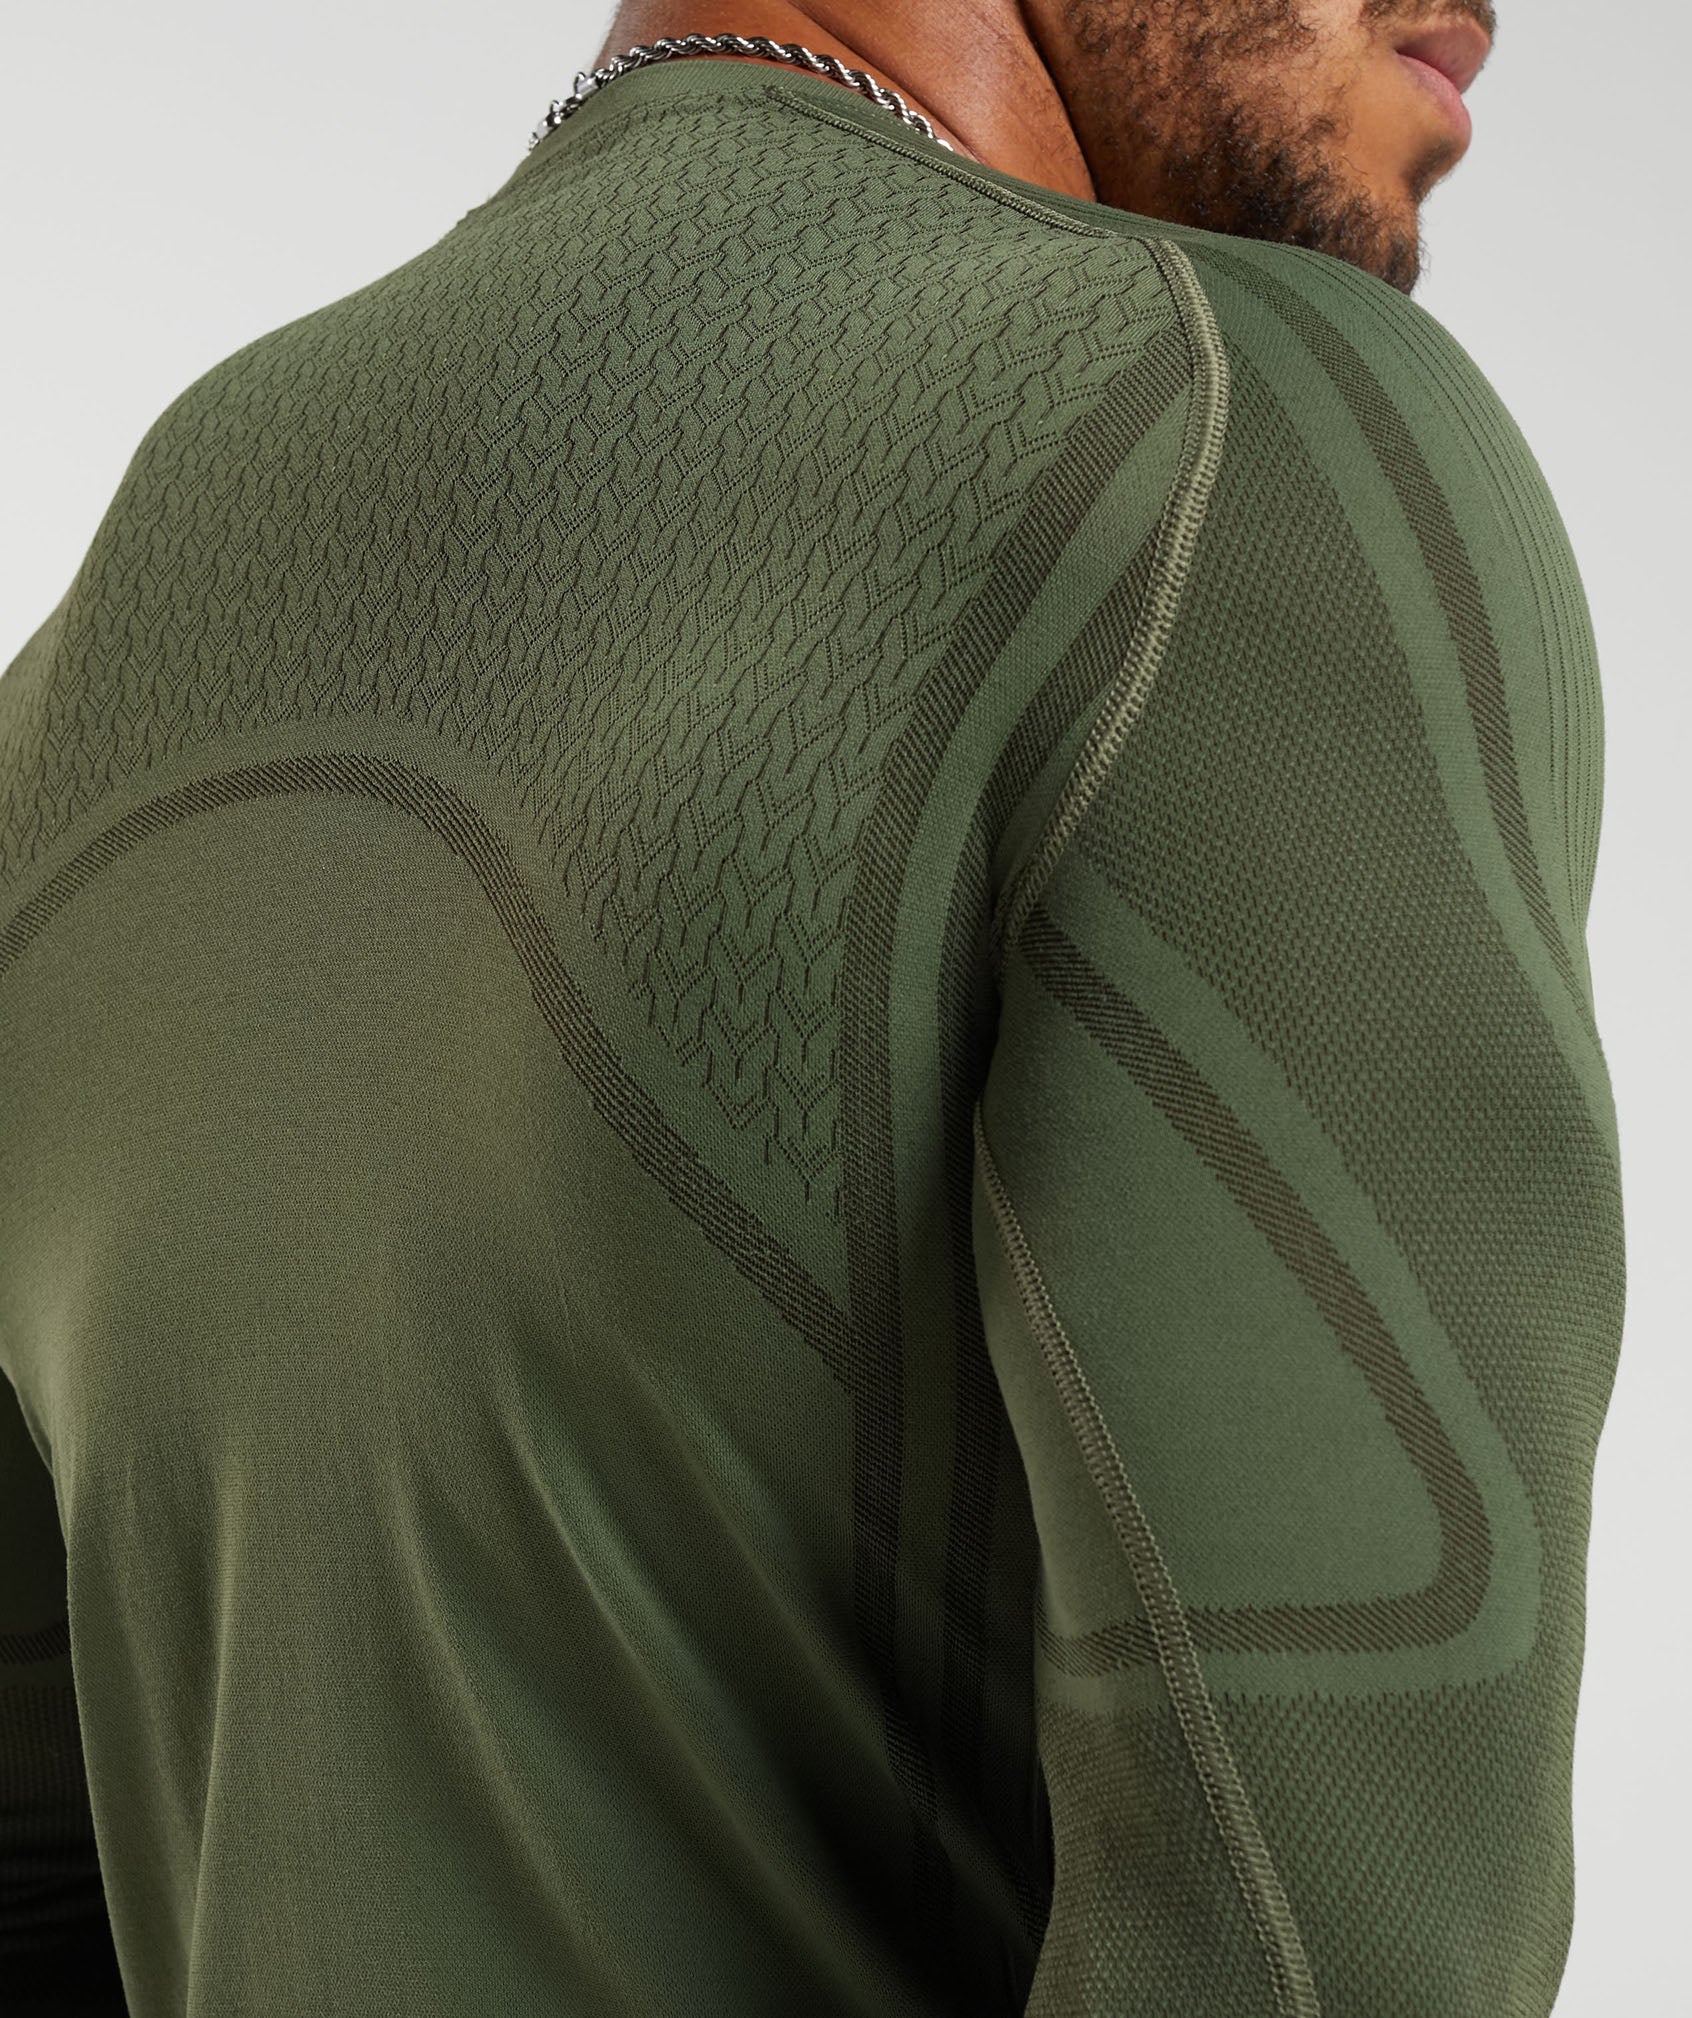 315 Seamless Long Sleeve T-Shirt in Core Olive/Deep Olive Green - view 5